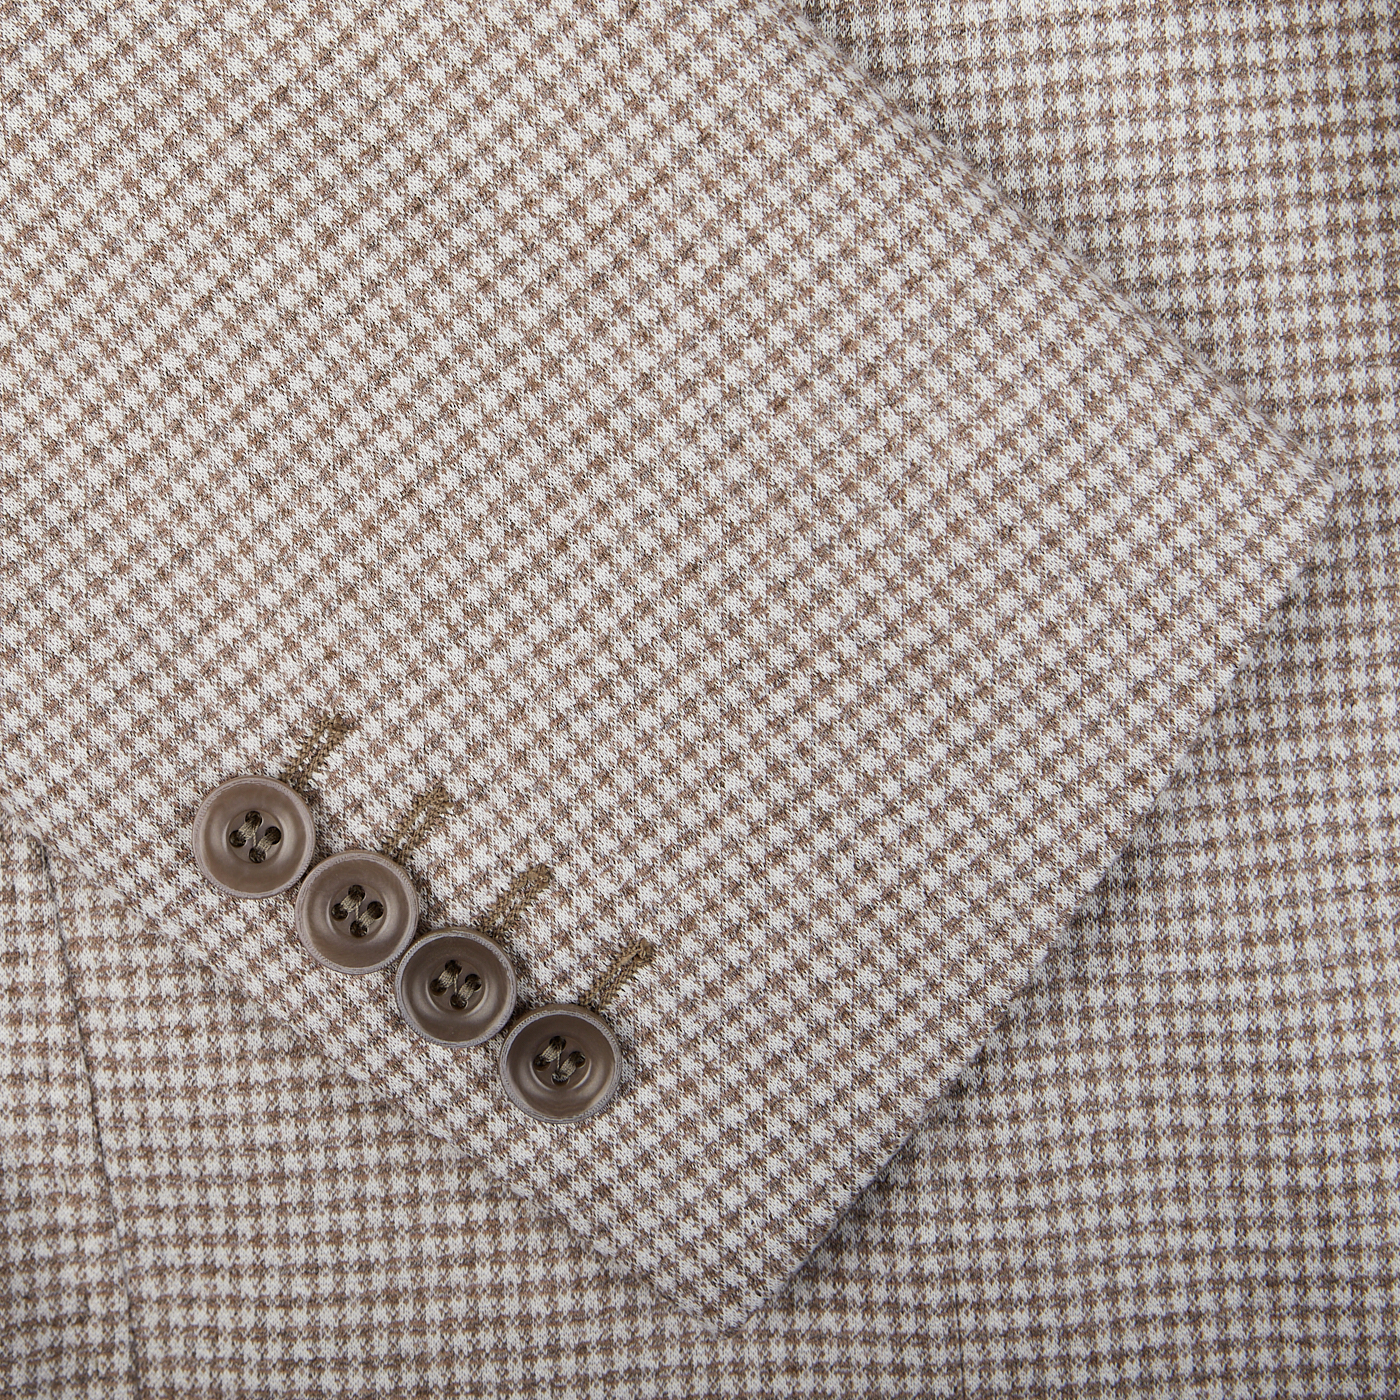 Close-up of a Canali Beige Houndstooth Cotton Jersey Blazer sleeve with four buttons.